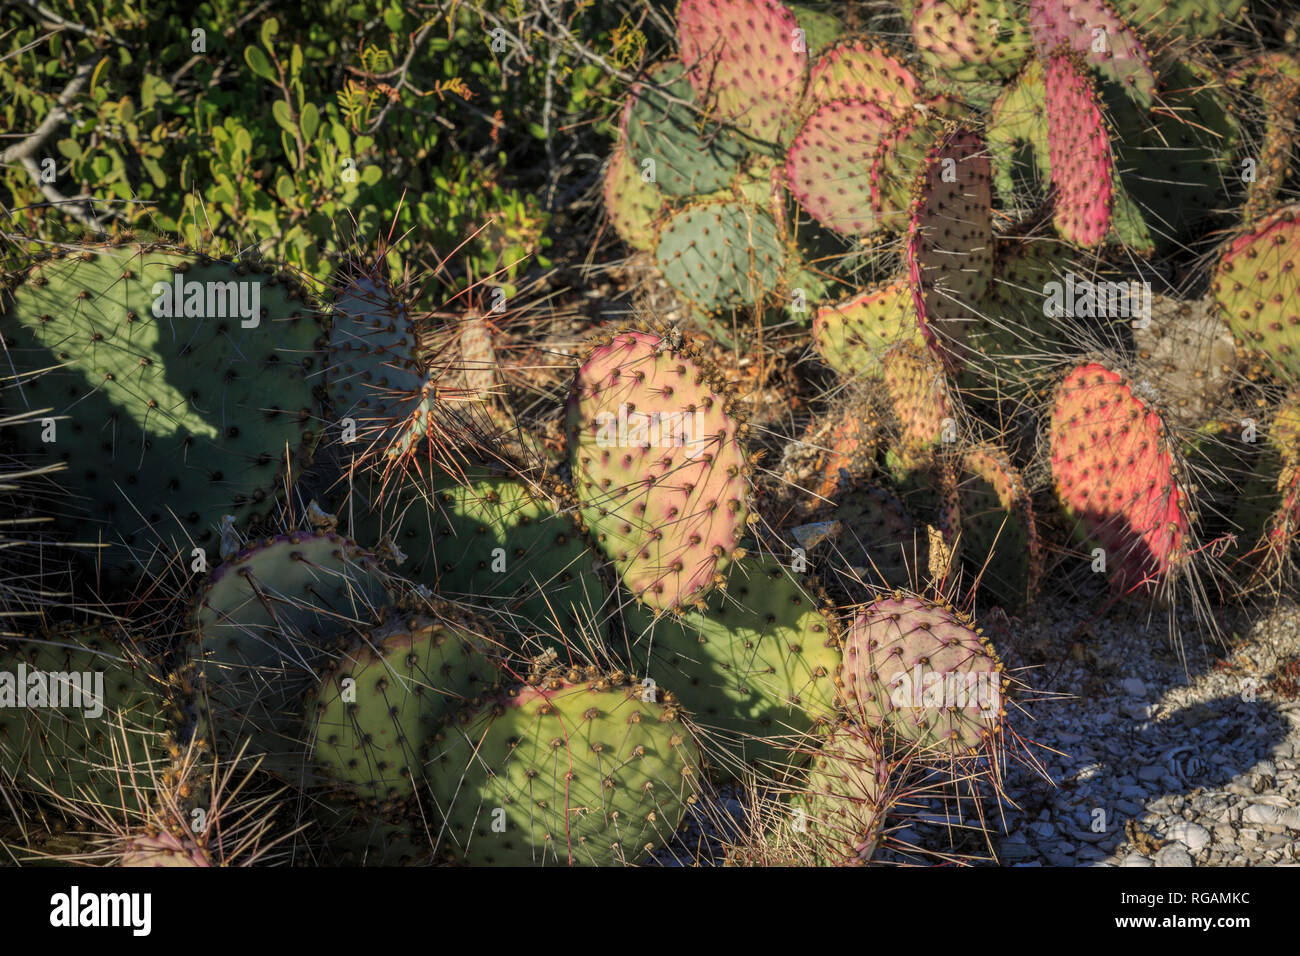 Variety of shades and sizes of prickly ground cactus. Sonora Desert, Northwest Mexico. Stock Photo